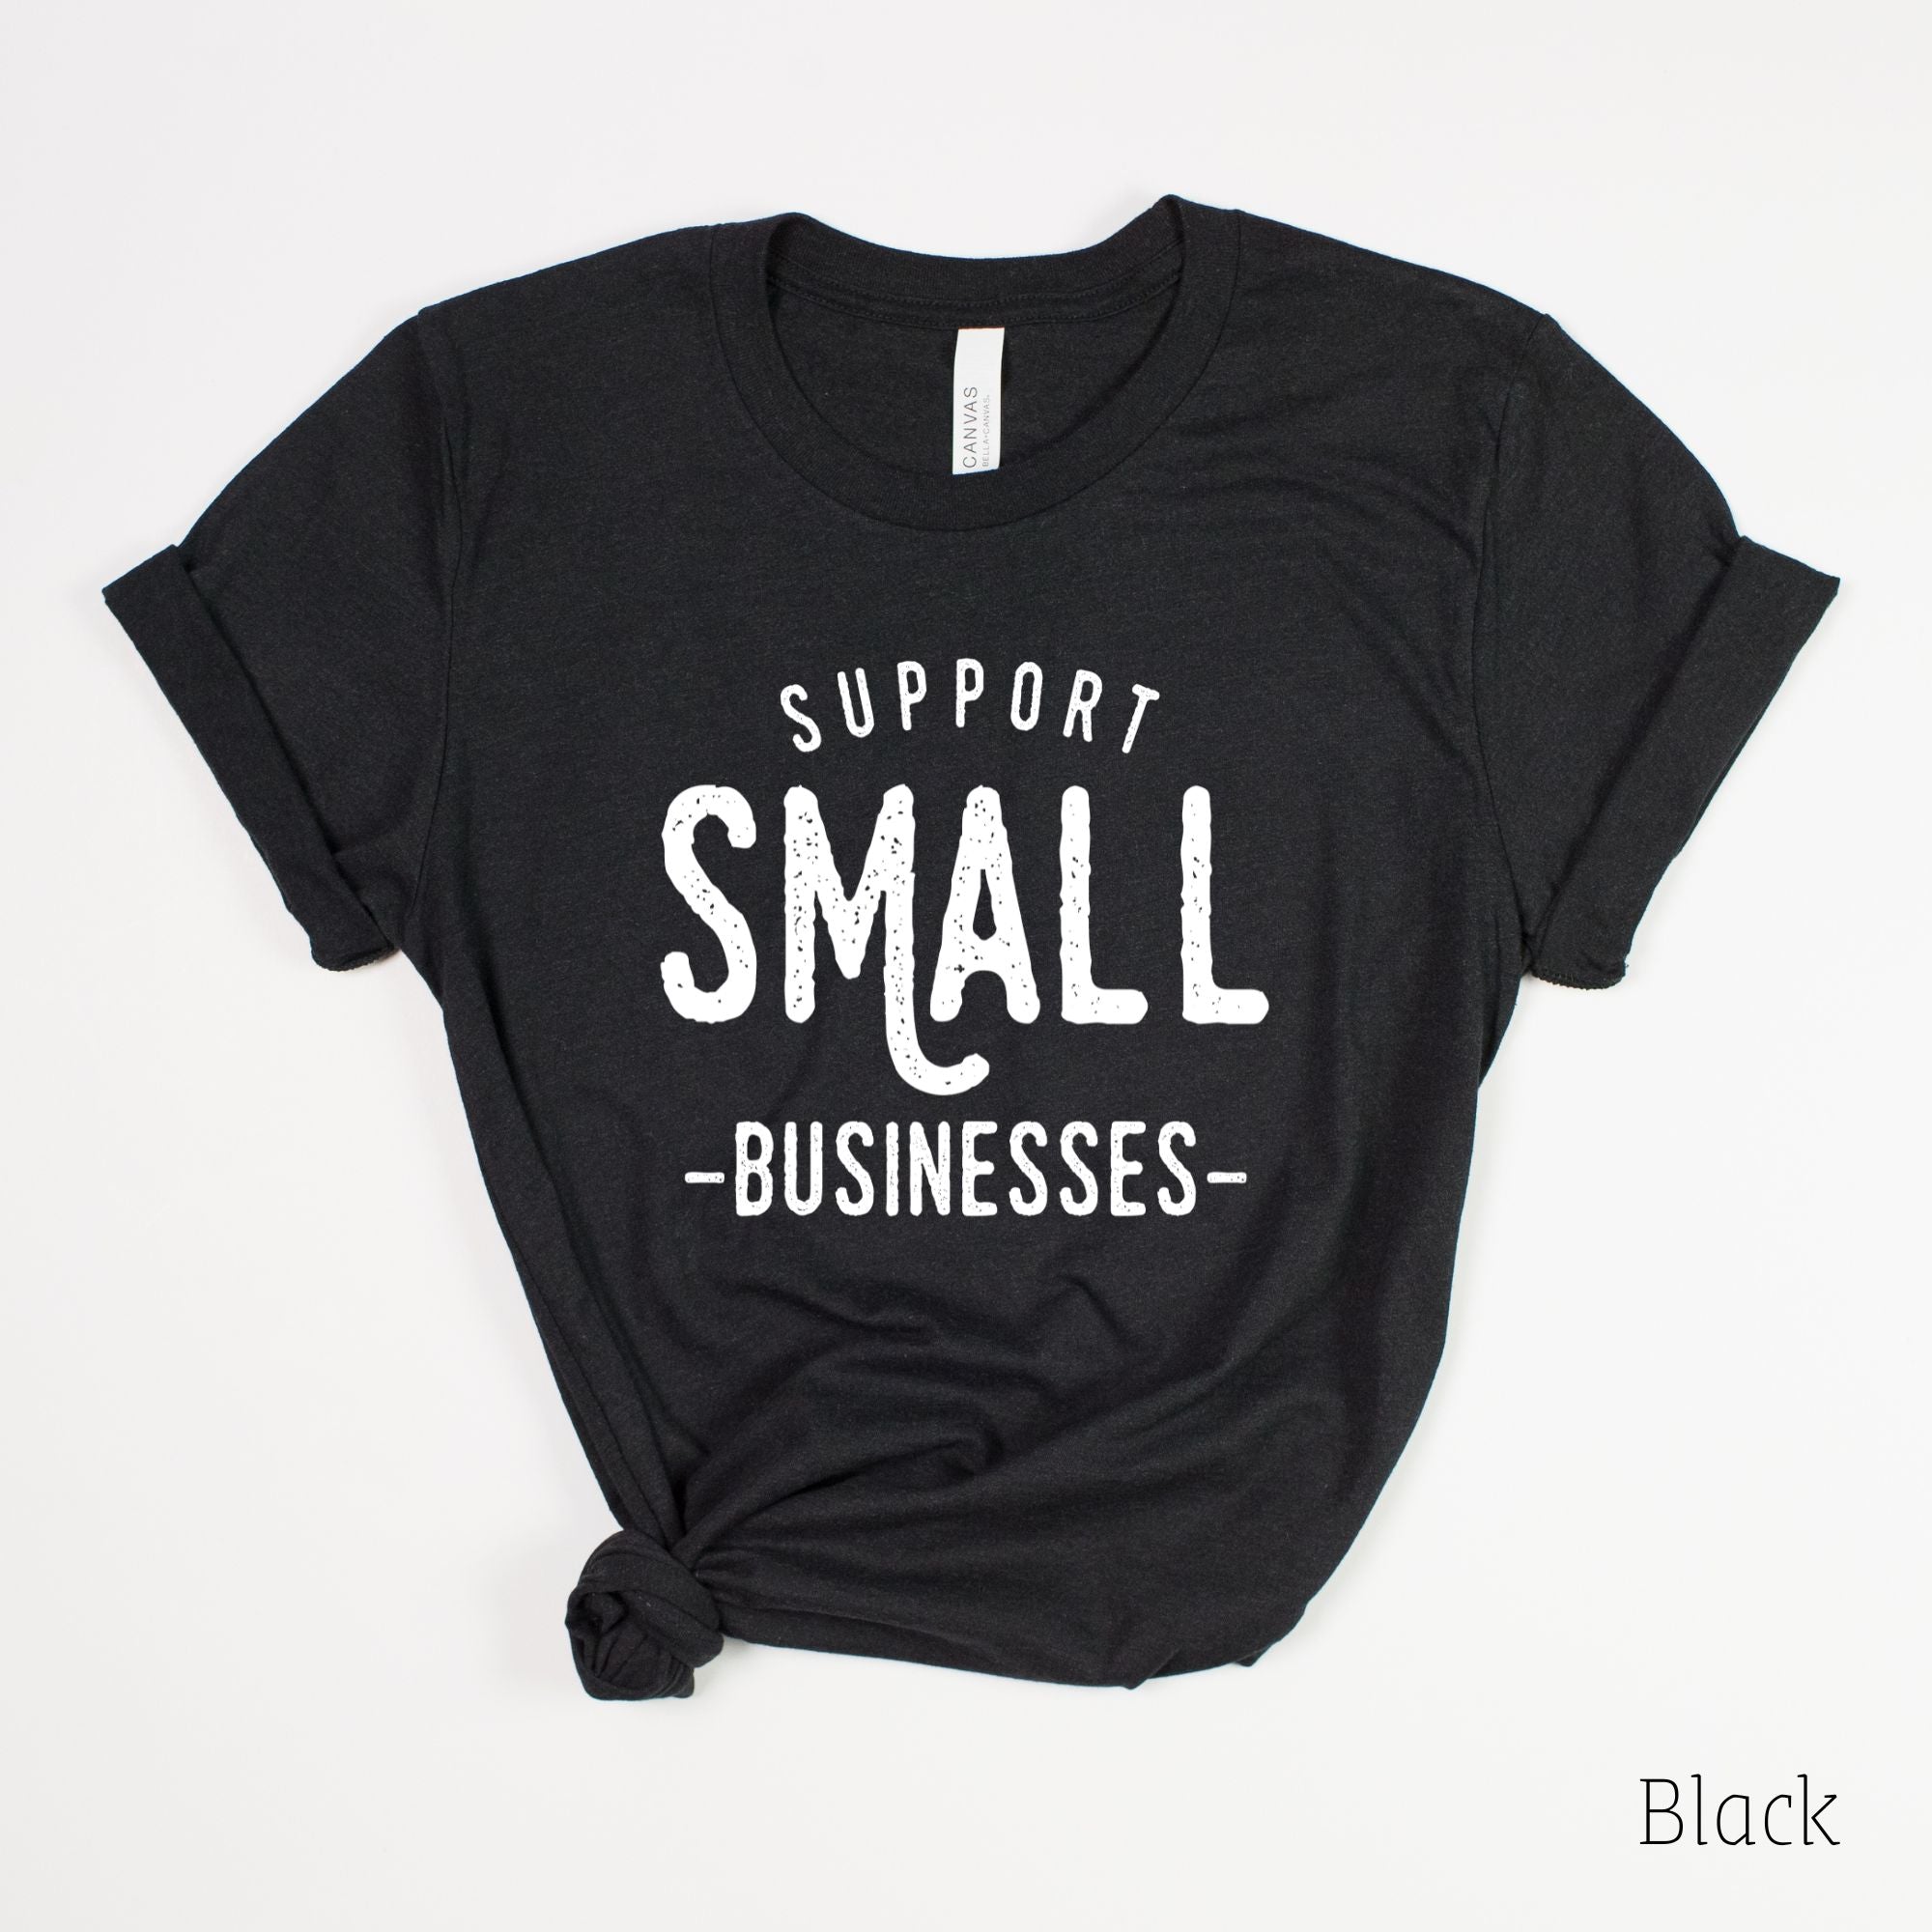 Support Small Businesses TShirt for Women *UNISEX FIT*-208 Tees Wholesale, Idaho